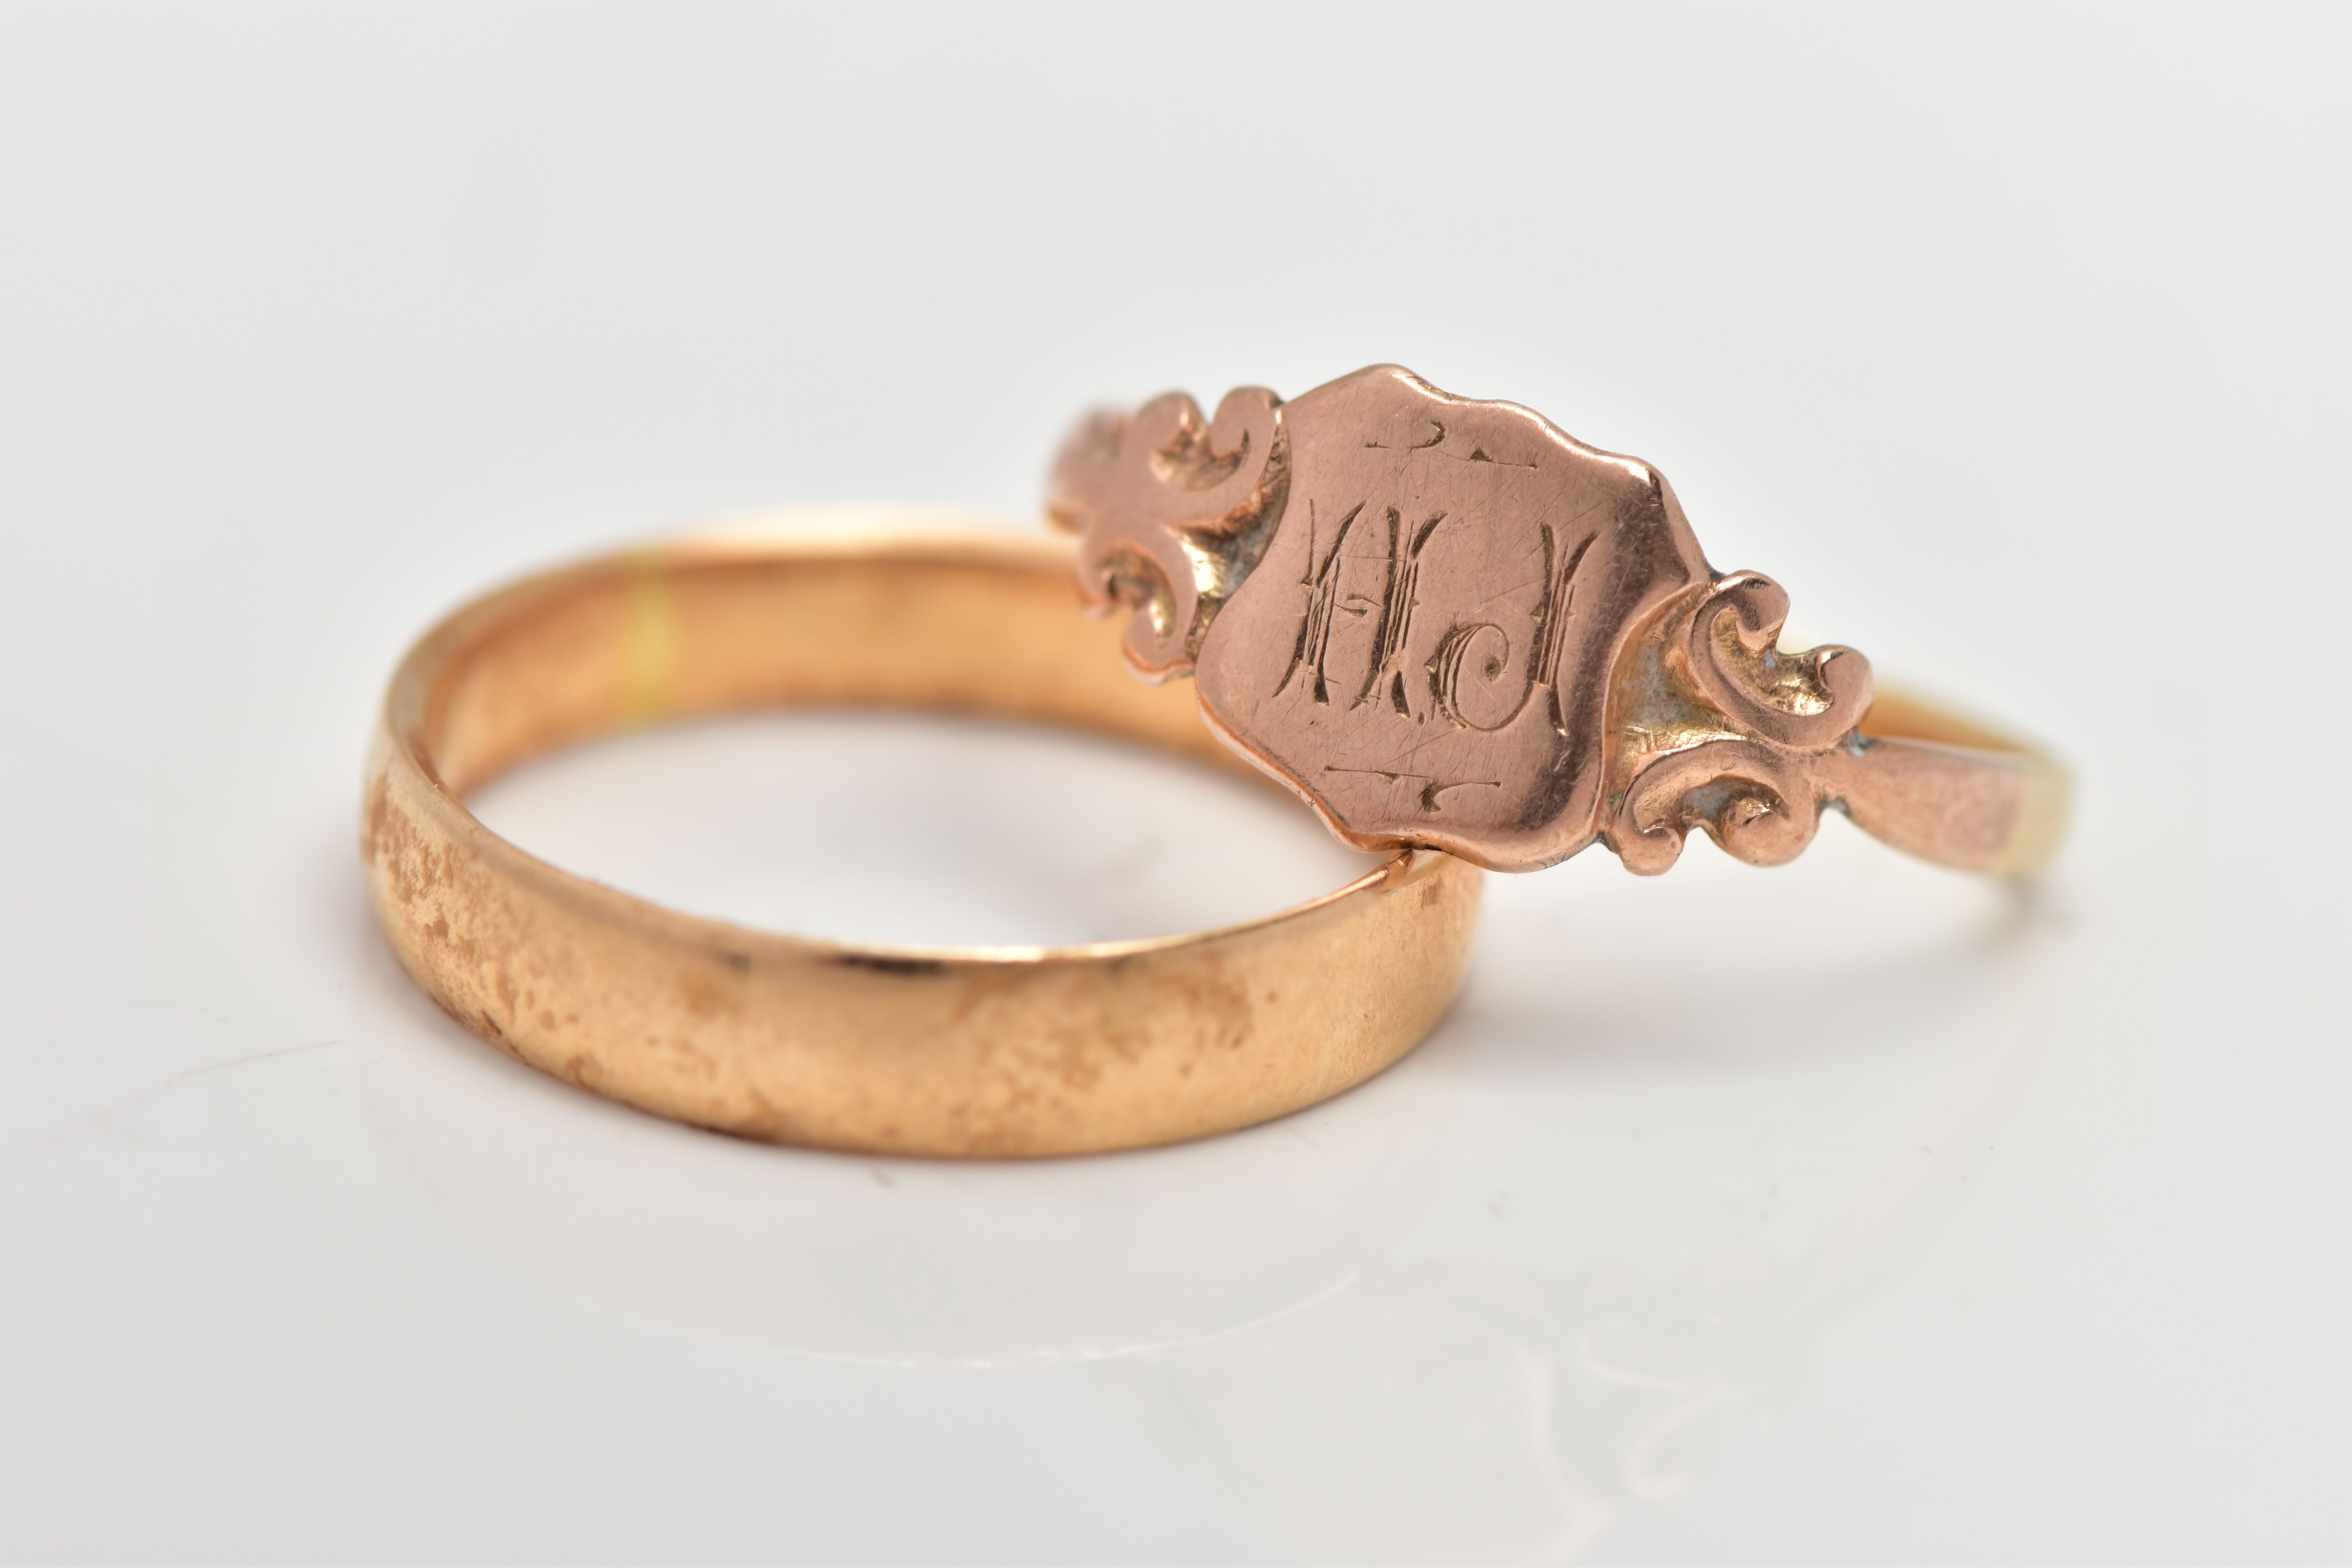 AN 18CT GOLD BAND RING AND A ROSE GOLD TONE SIGNET RING, plain polished band, approximate band width